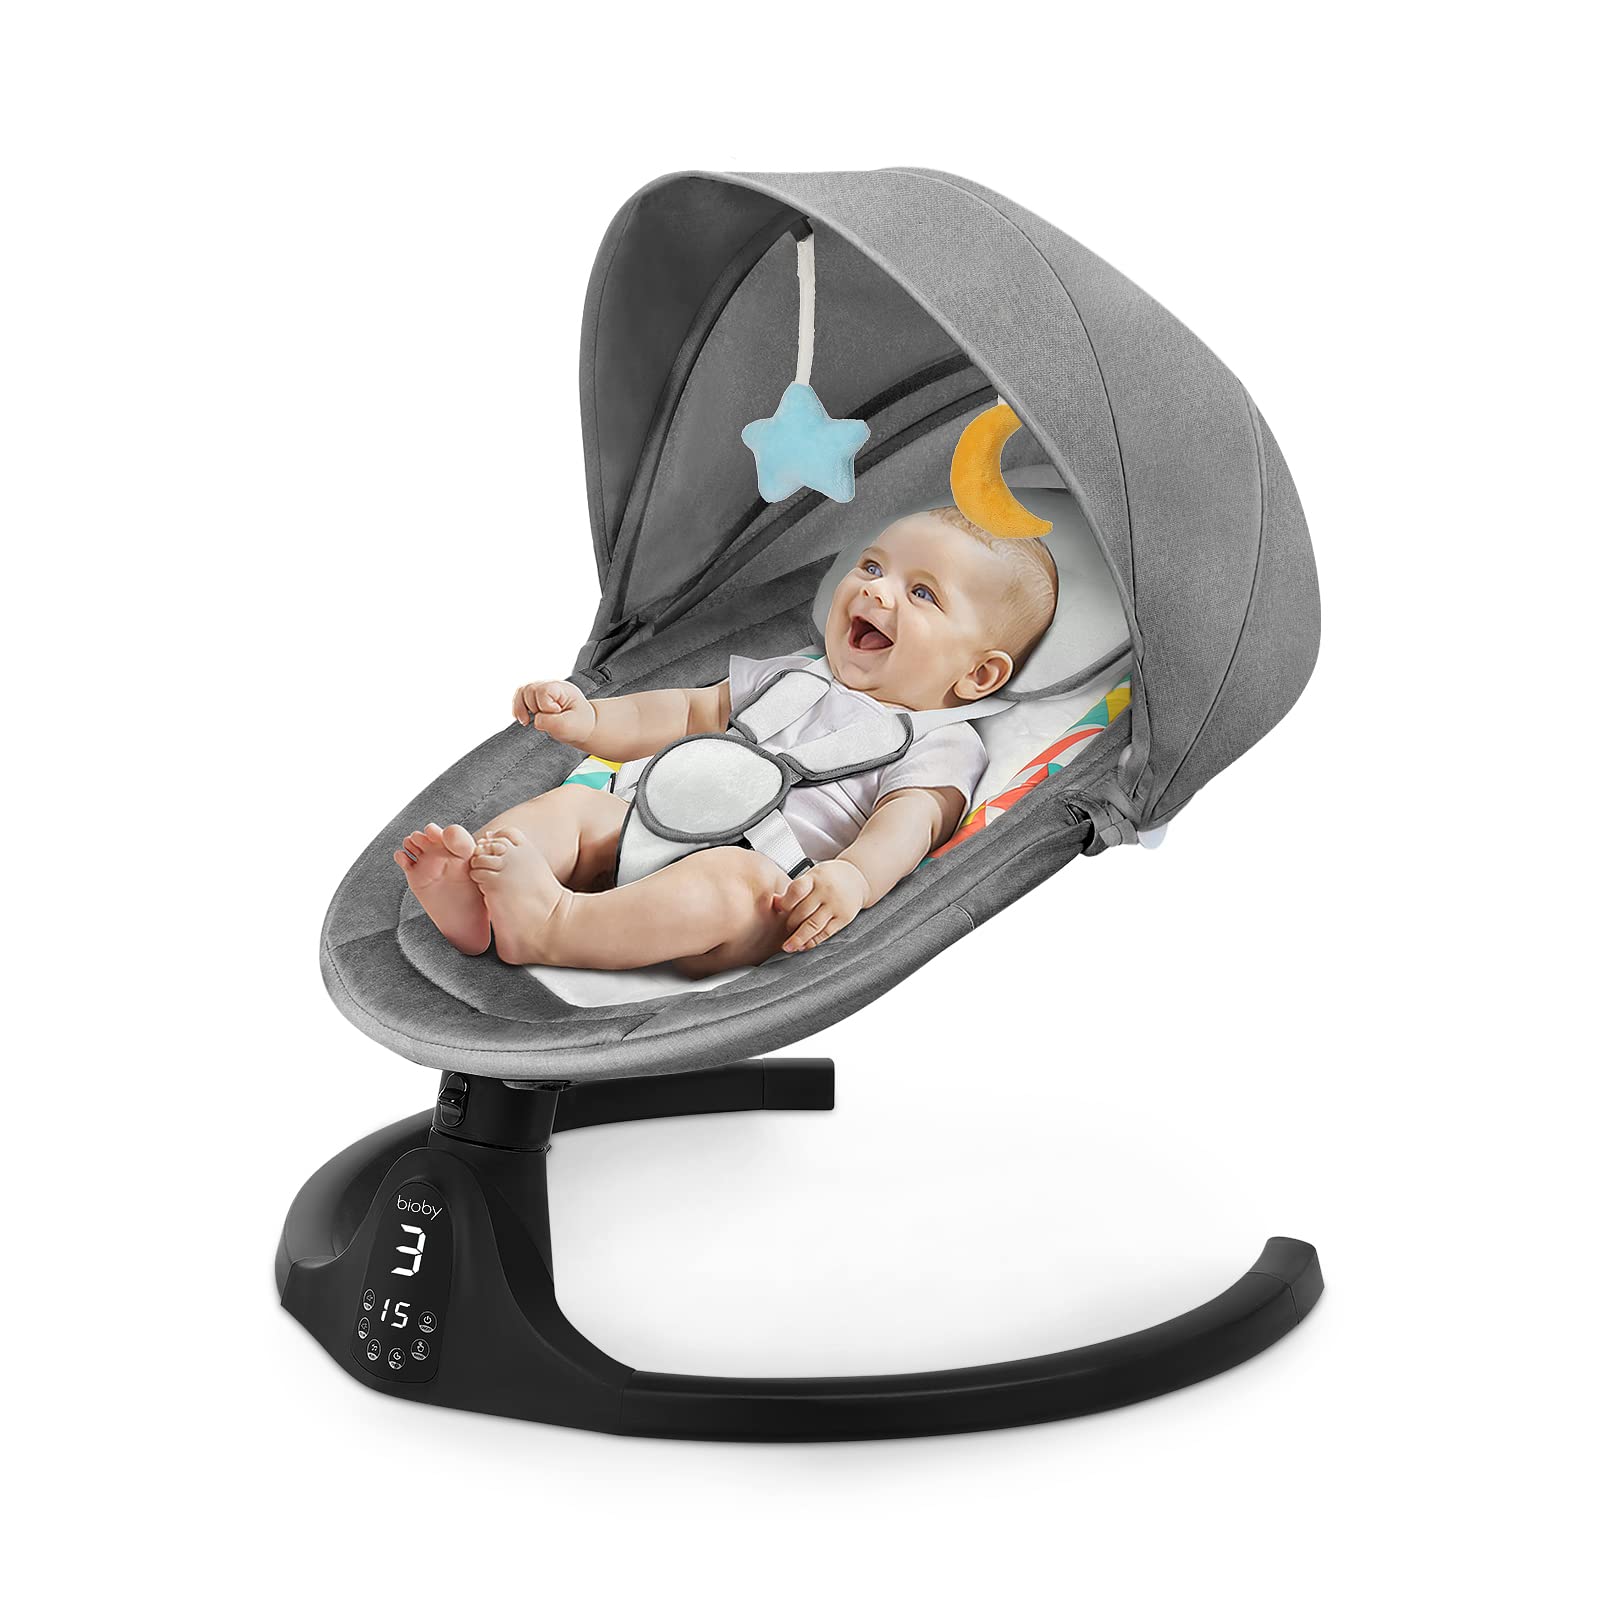 Bioby Baby Swing for Infants,The Five-Point Seat Belt,Bluetooth Touch Screen/Remote Control Baby Bouncer with Music Speaker,Motorized Portable Swing with 5 Swing Speeds（Black）